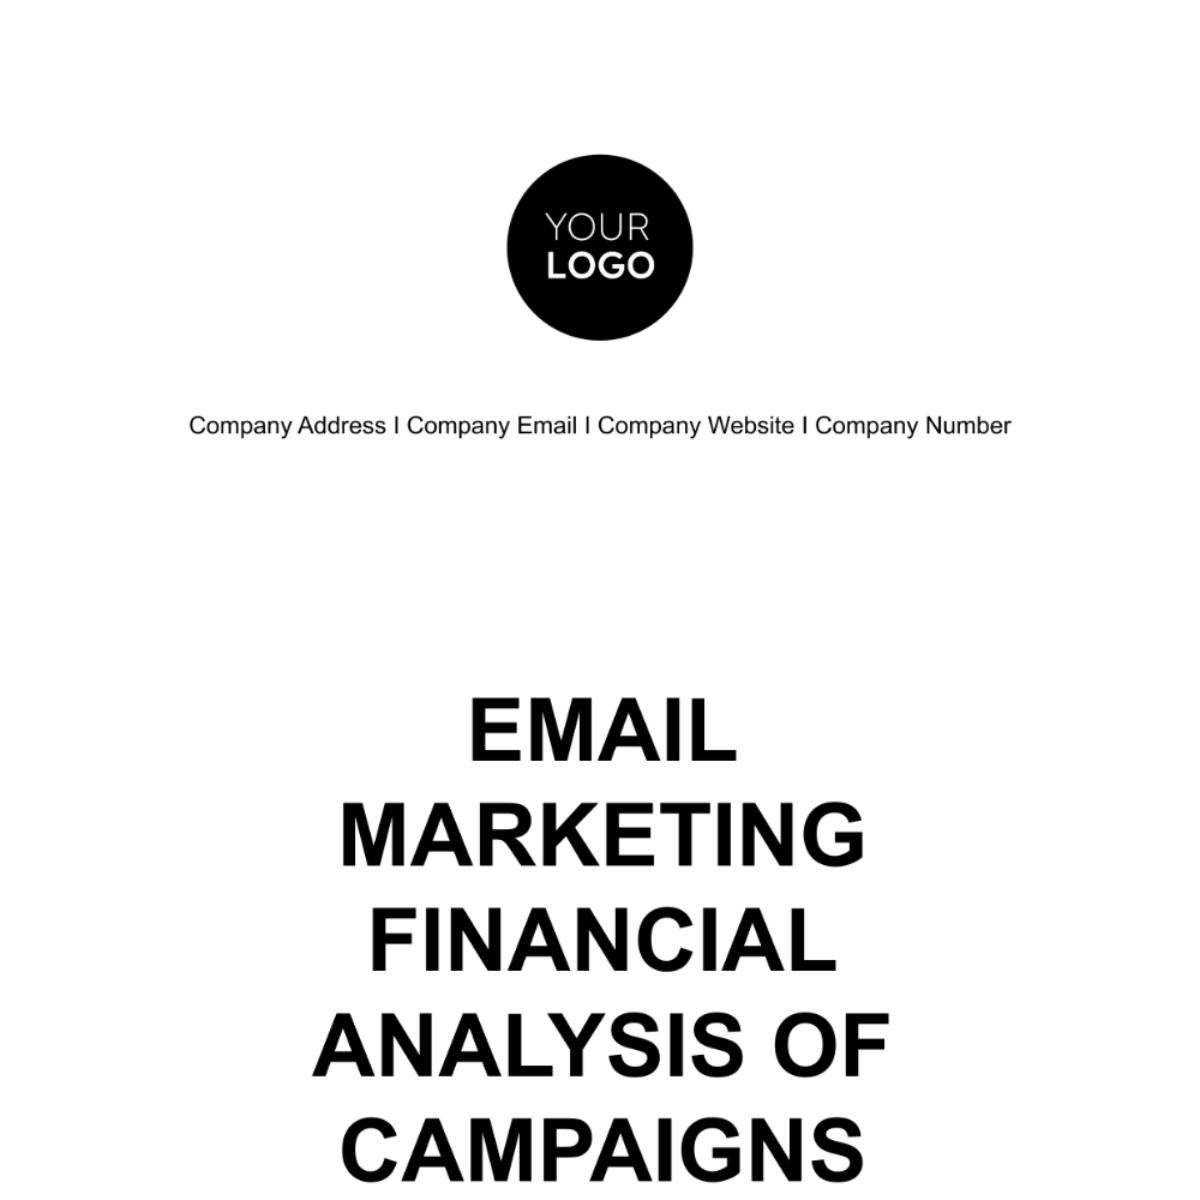 Email Marketing Financial Analysis of Campaigns Template